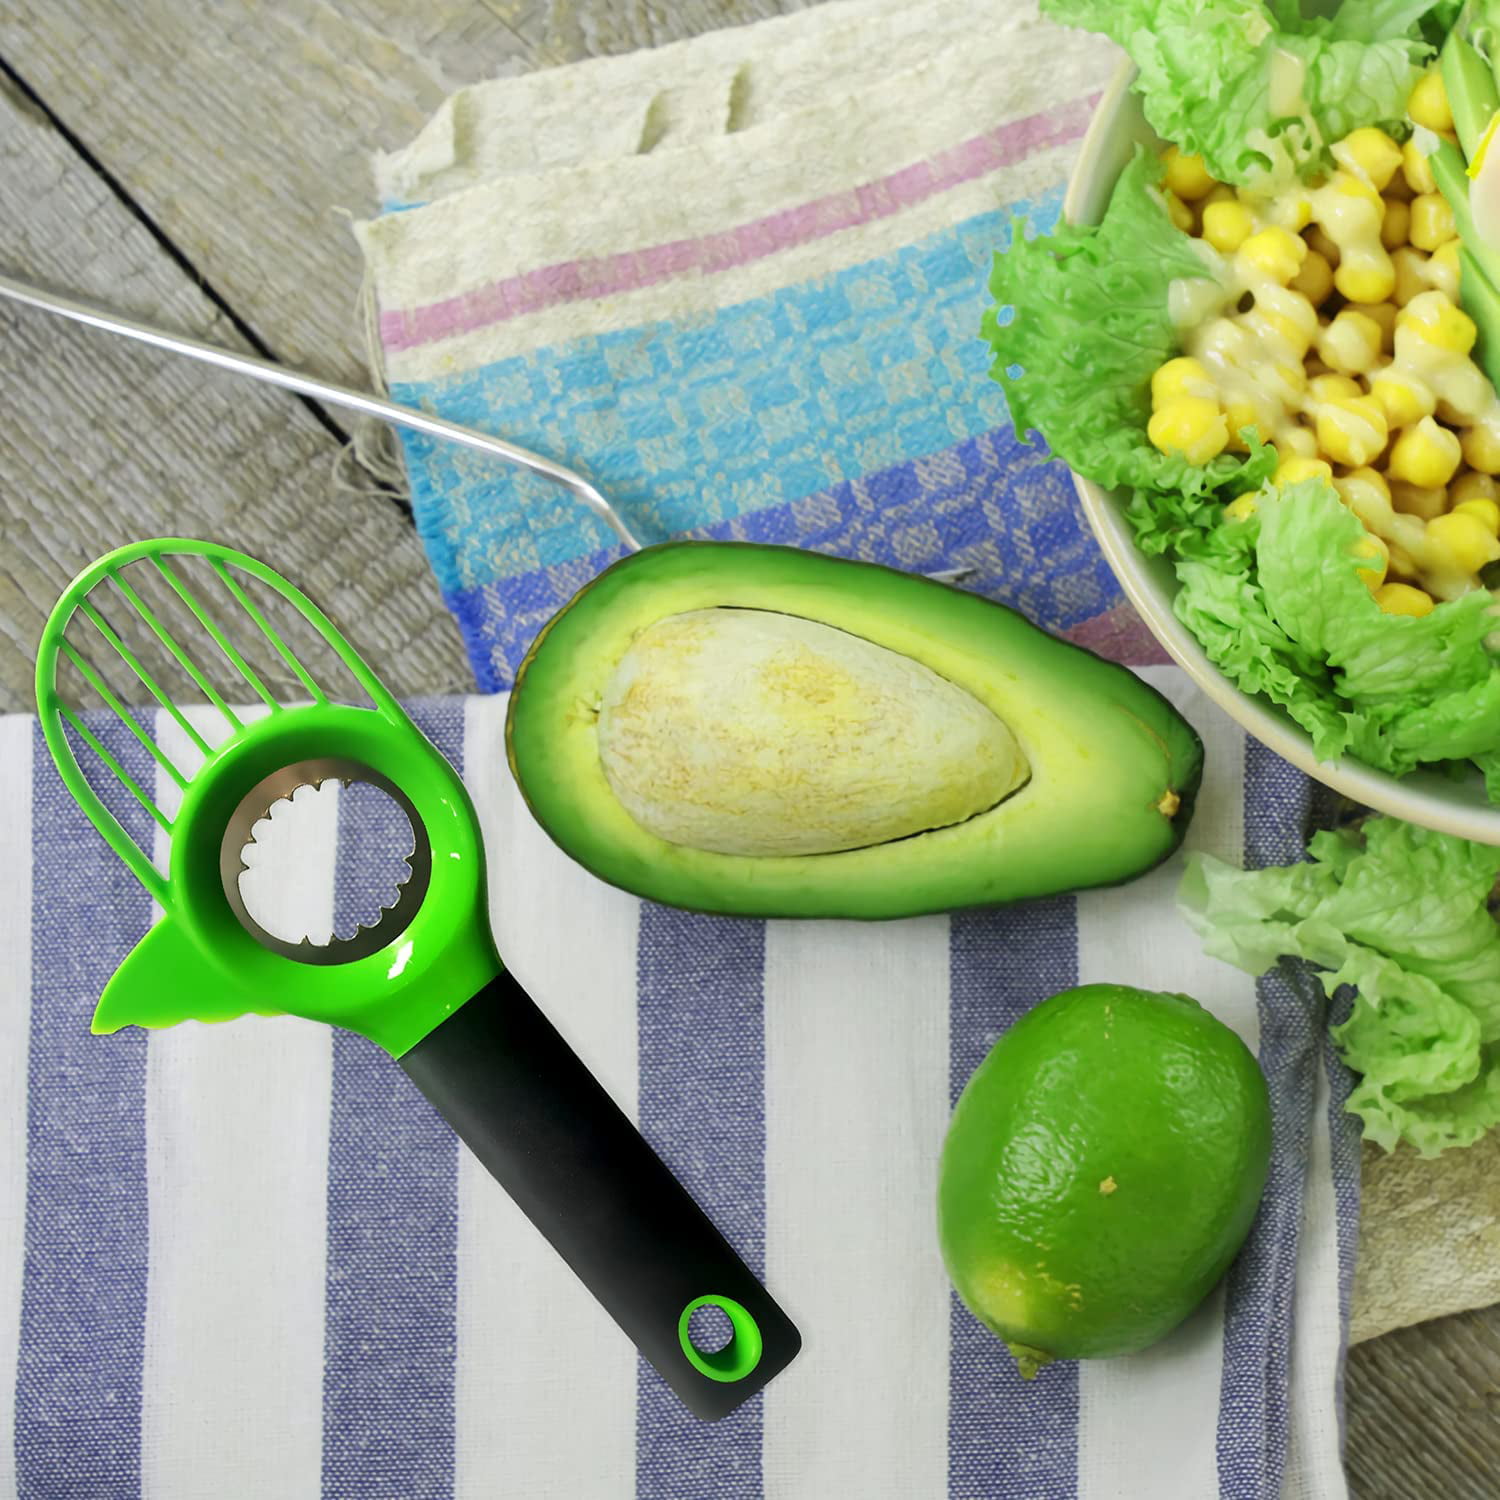 Avocado Cutter Slicer and Pitter 3 in 1, Avocado Tool with Silicon Grip  Handle Avocado Pitter, BPA Free Avocado Slicer Pit Remover, Multifunctional  Avocado Knife to Split Pit Cut 